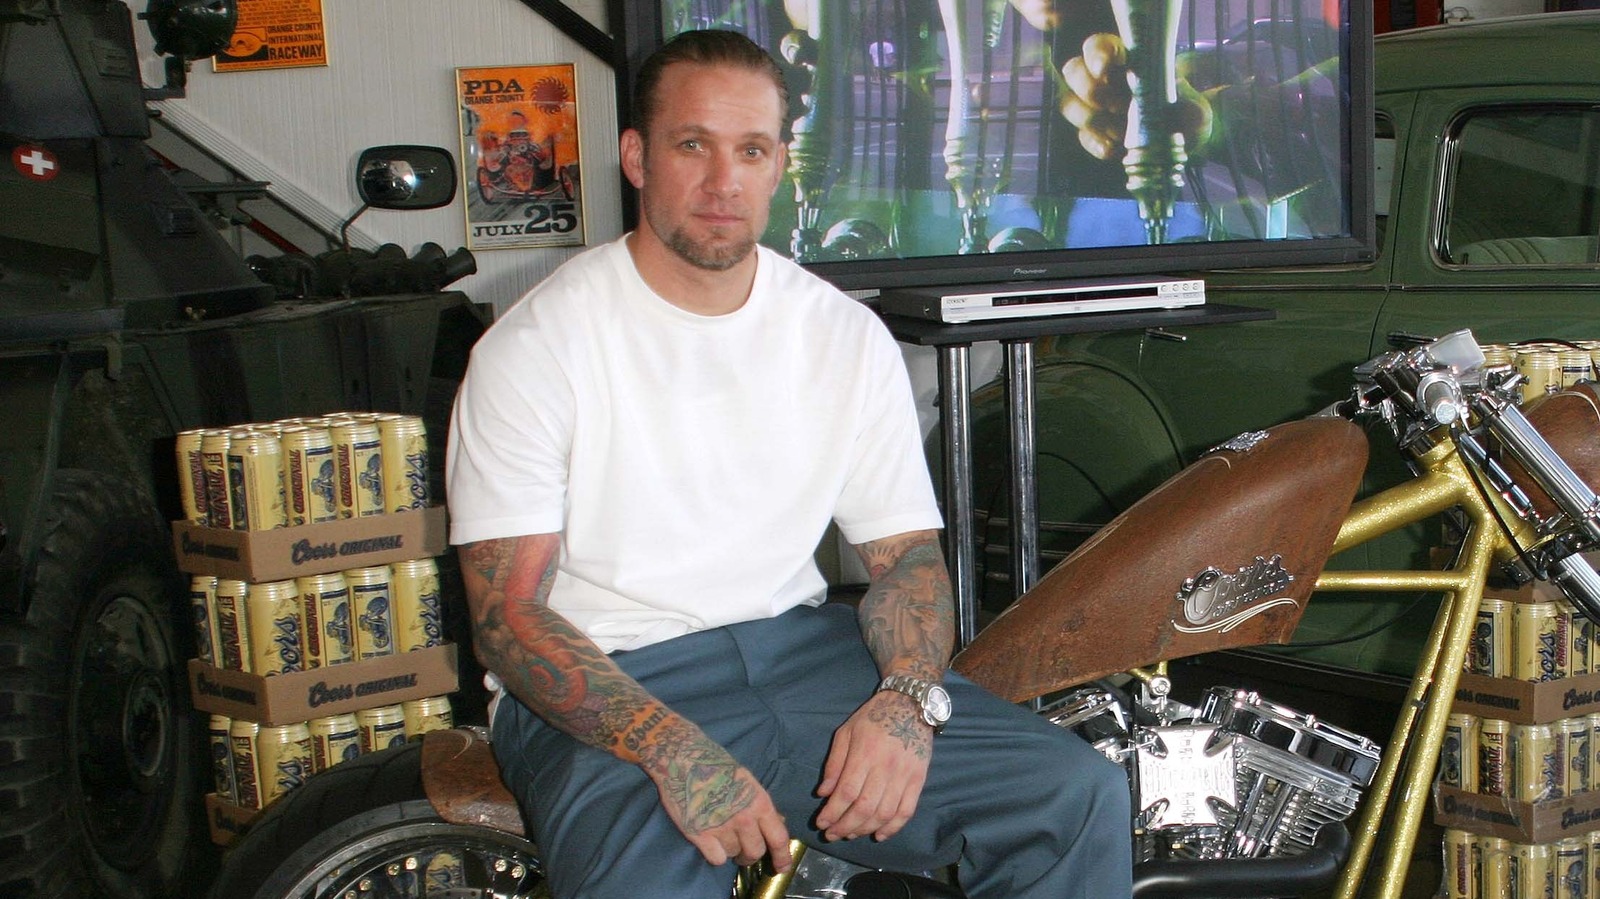 What Happened To West Coast Choppers After Their Controversy